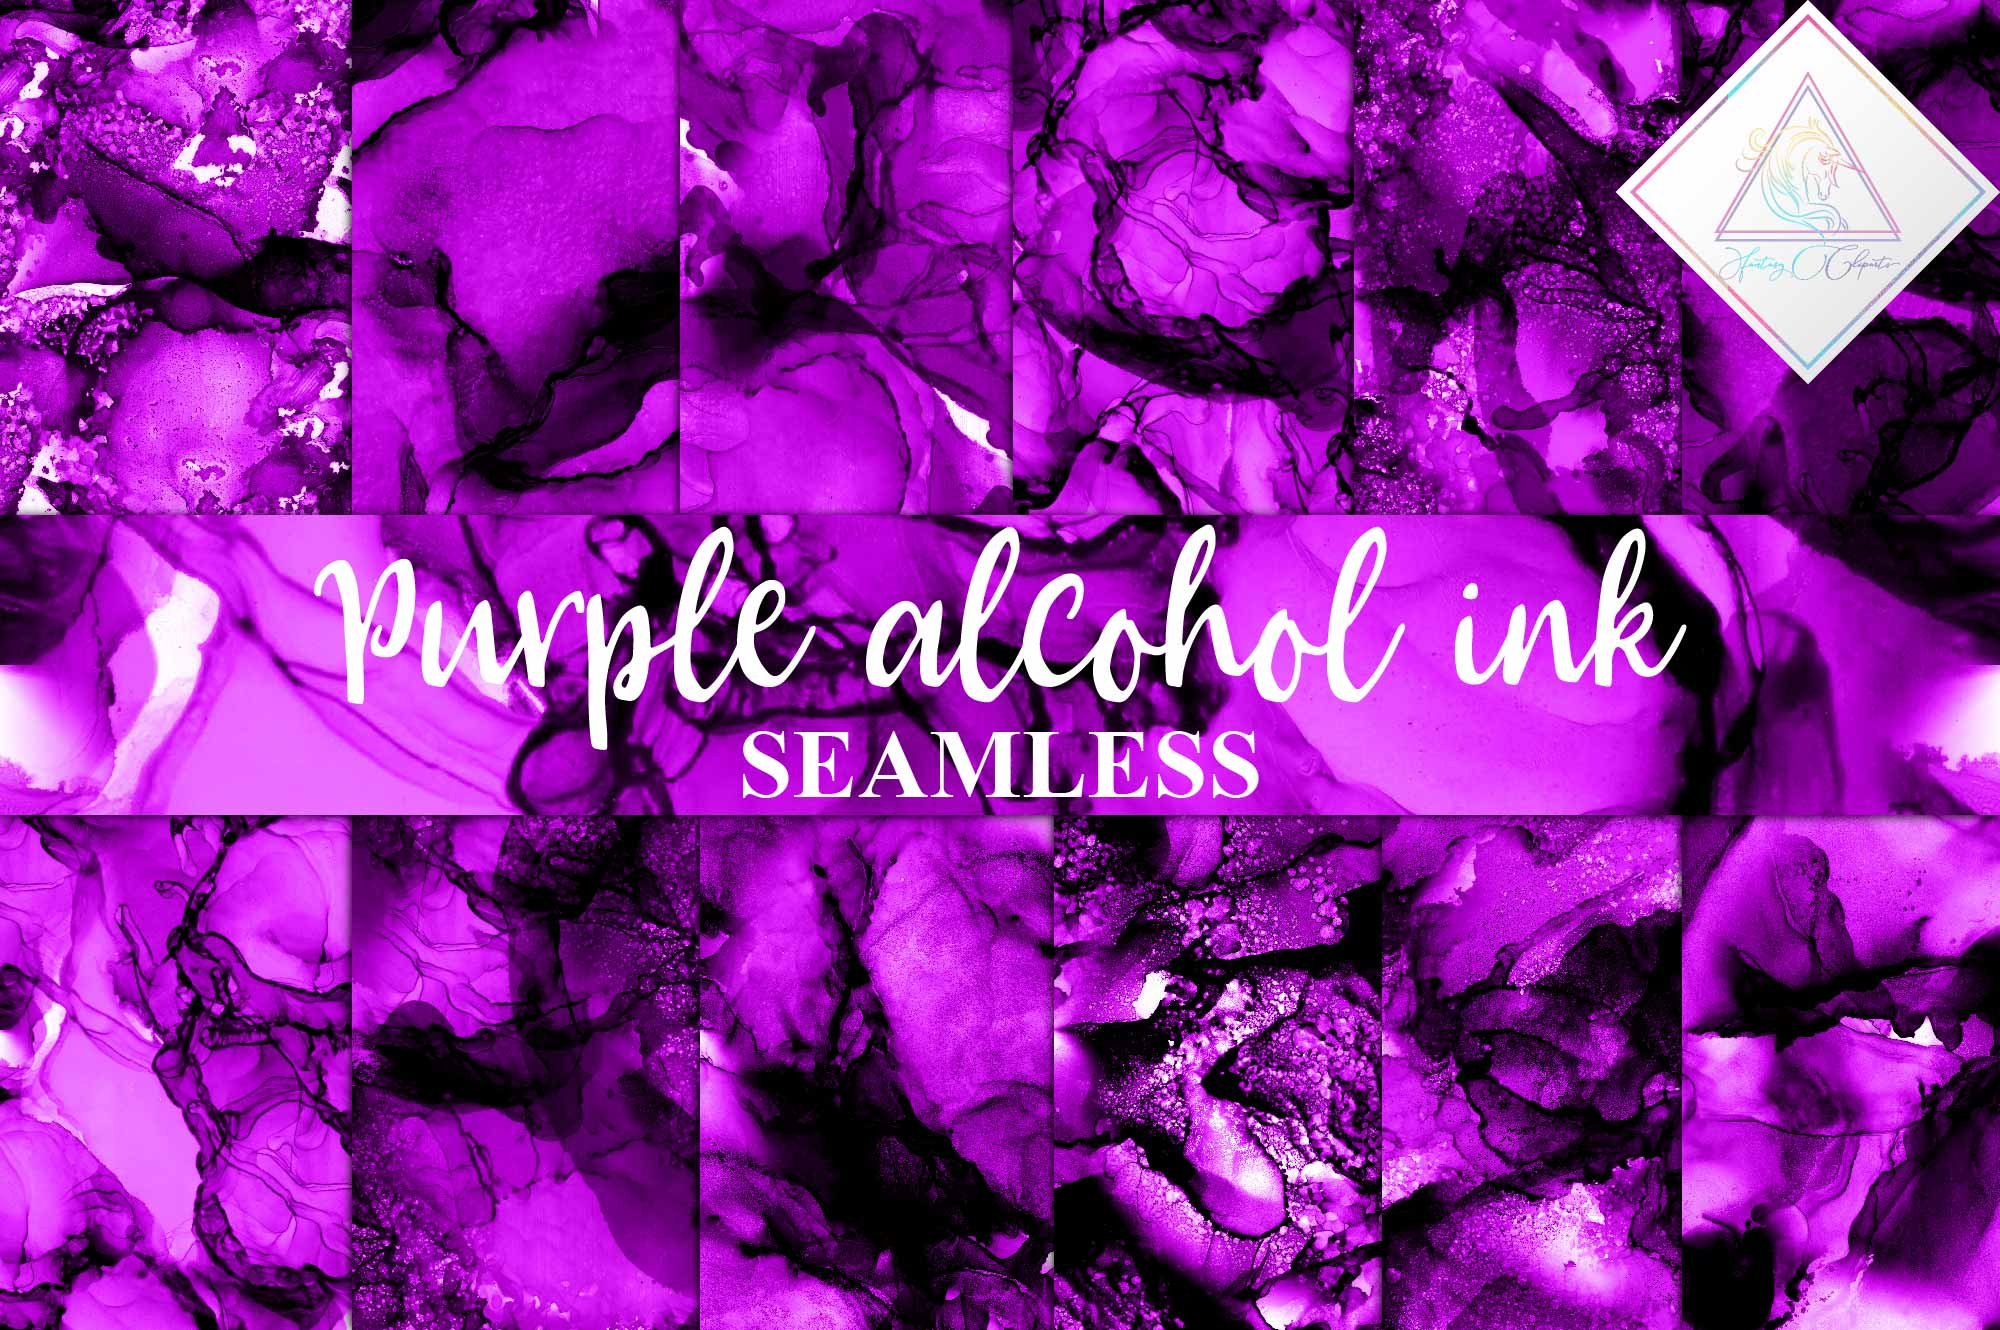 Seamless Purple Alcohol Ink Textures cover image.